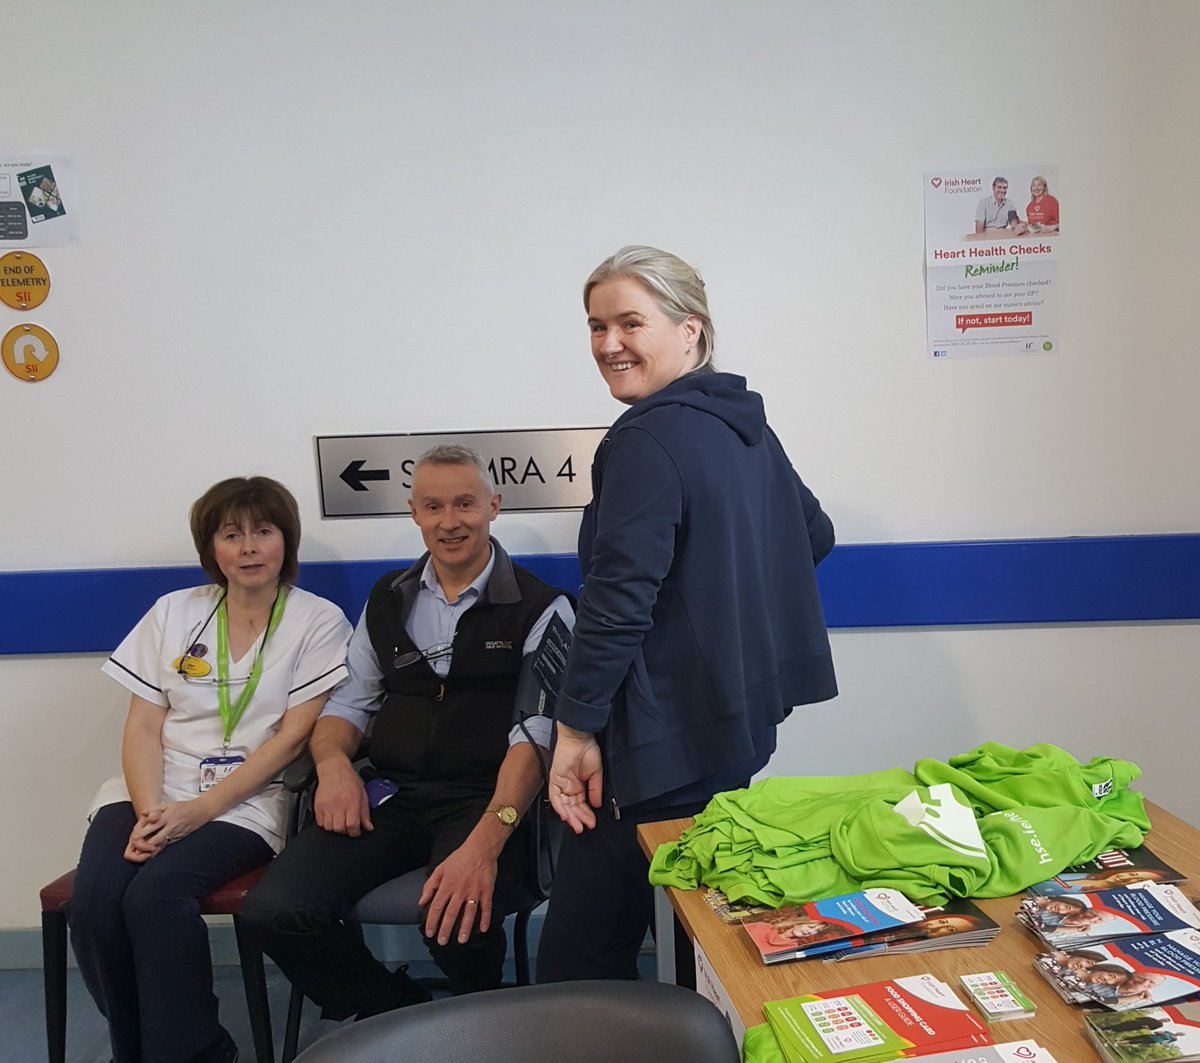 Long queues today for the lunchtime blood pressure checks for staff in UHL #healthyireland #workwell18 @CatrionaAhern @ULHospitals